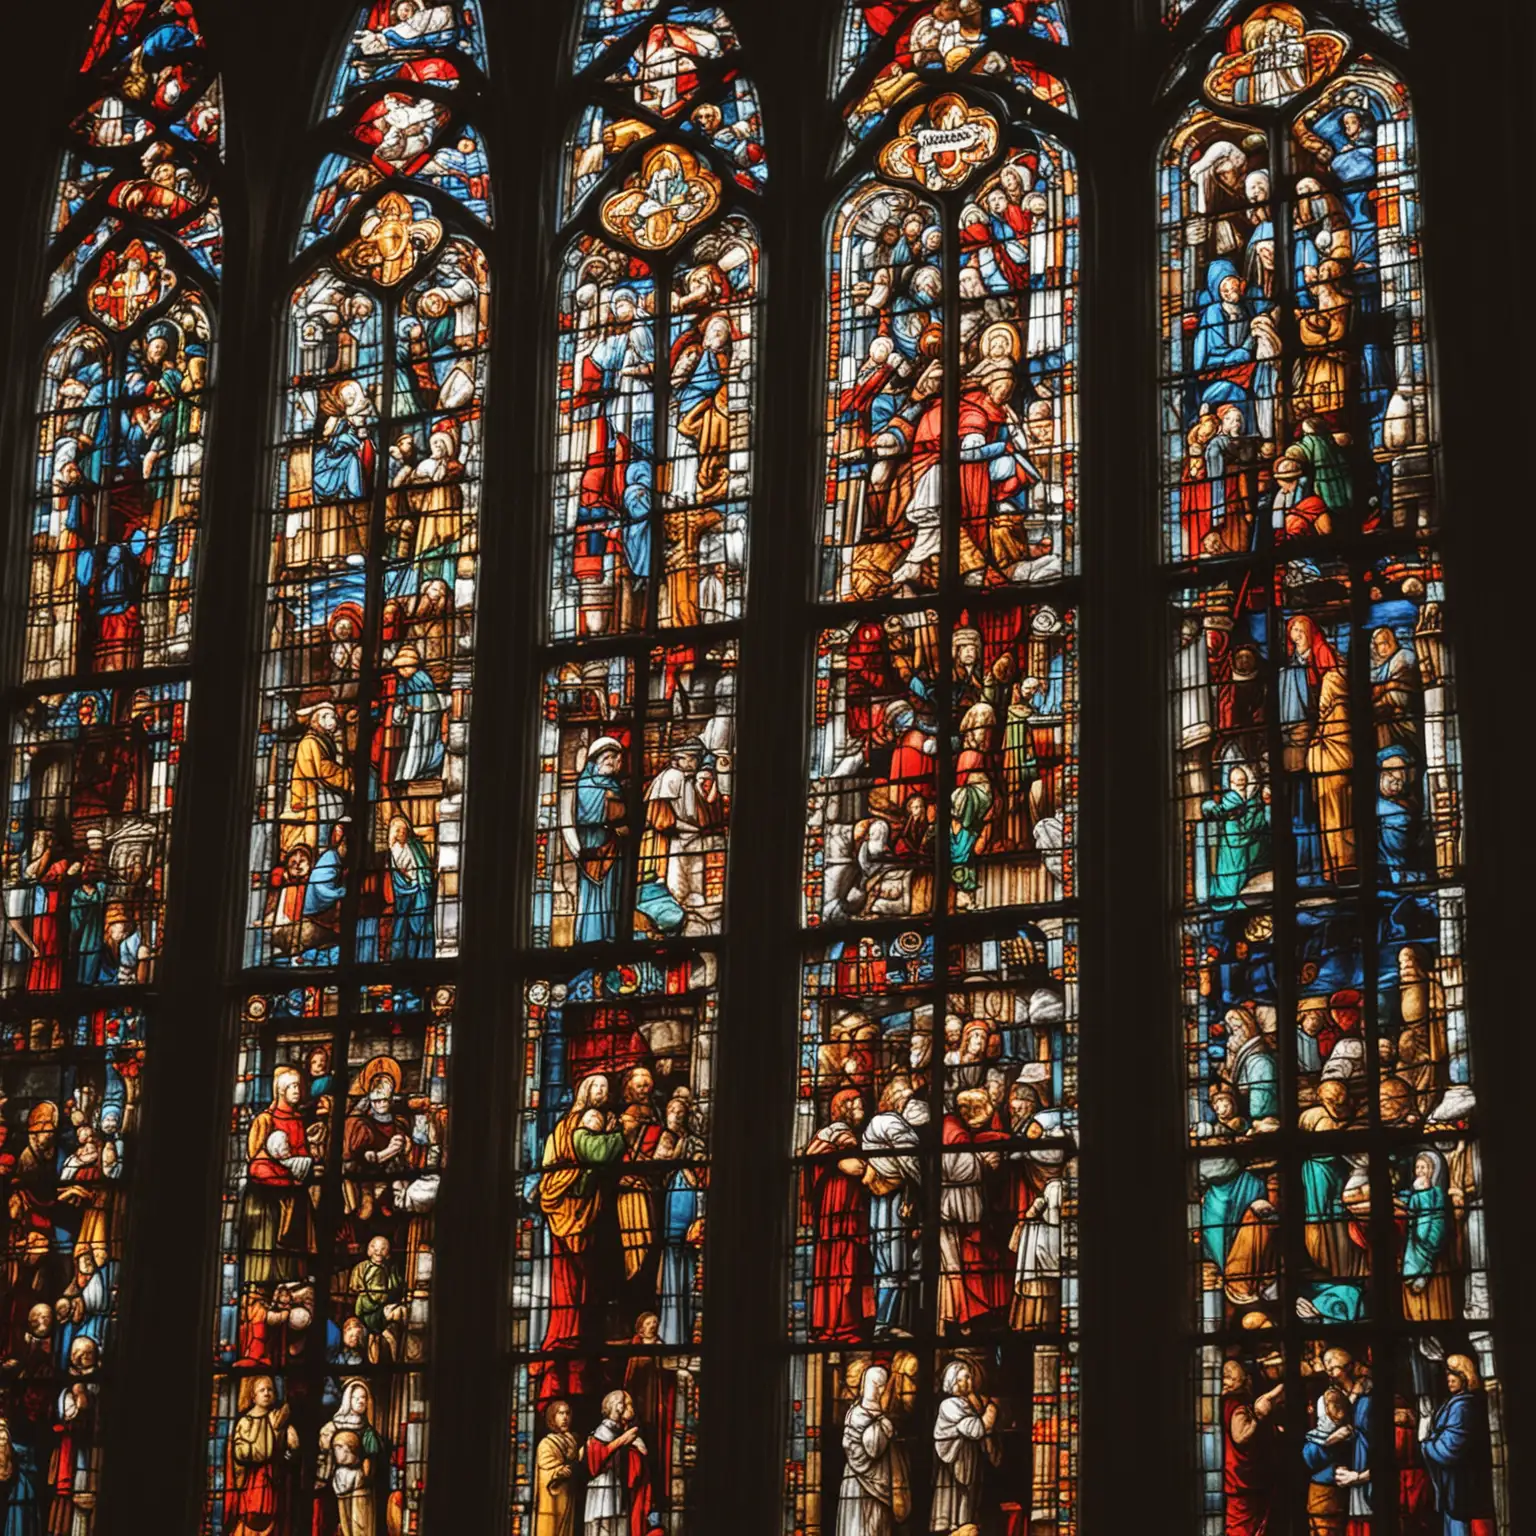 up close image of stained glass church windows